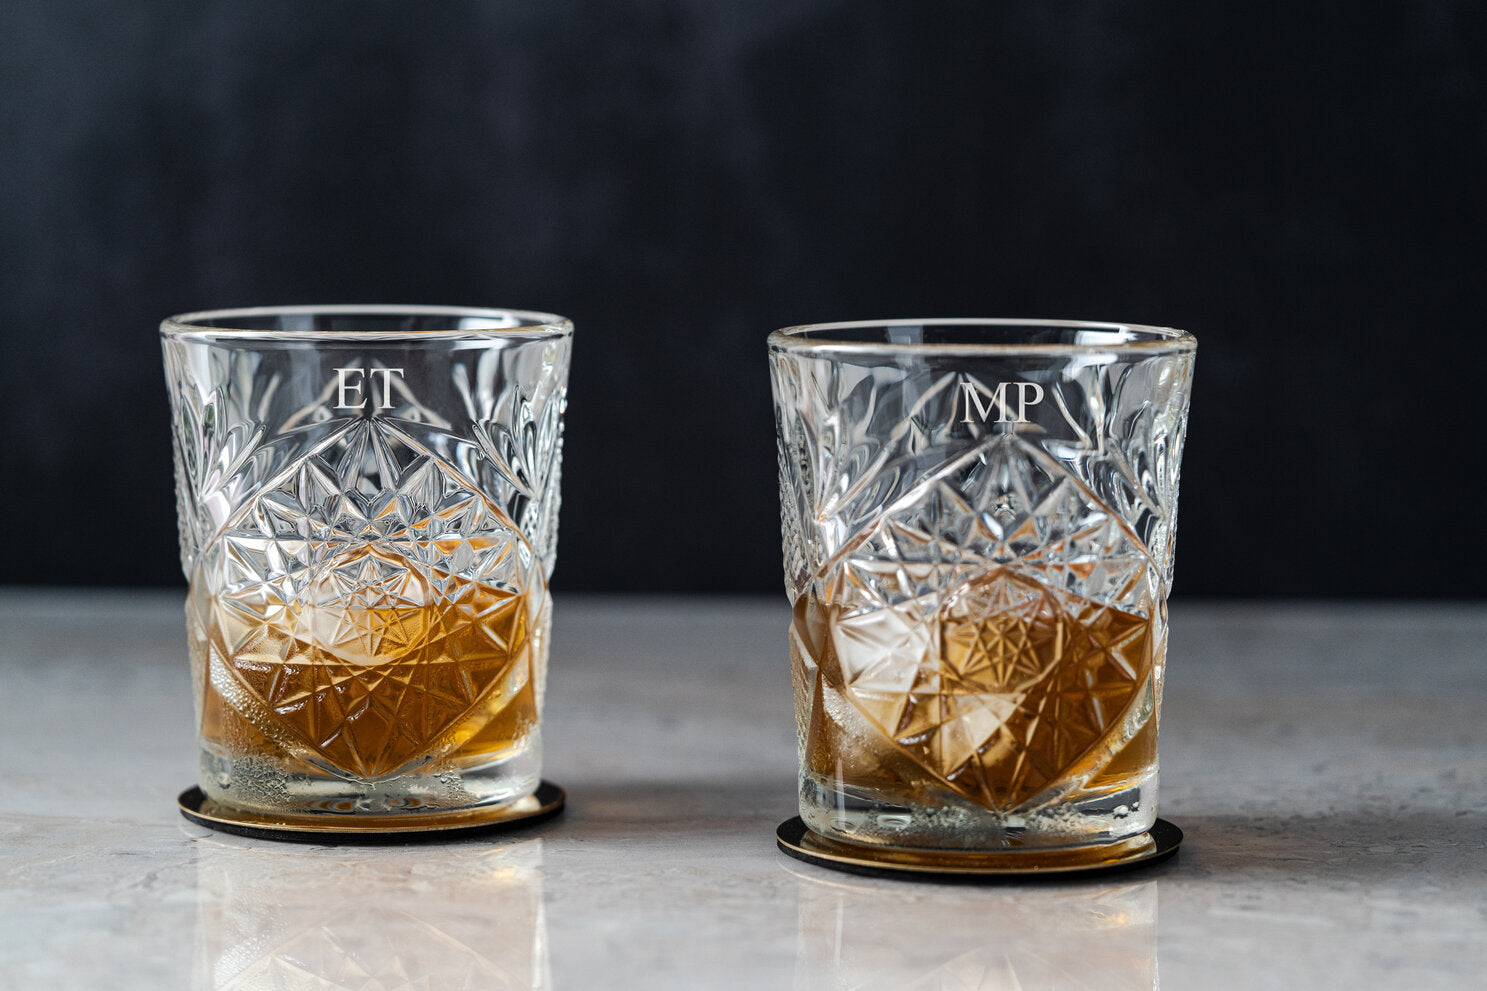 Jacob Whiskey Personalised Glassware - Nouvelle Glass